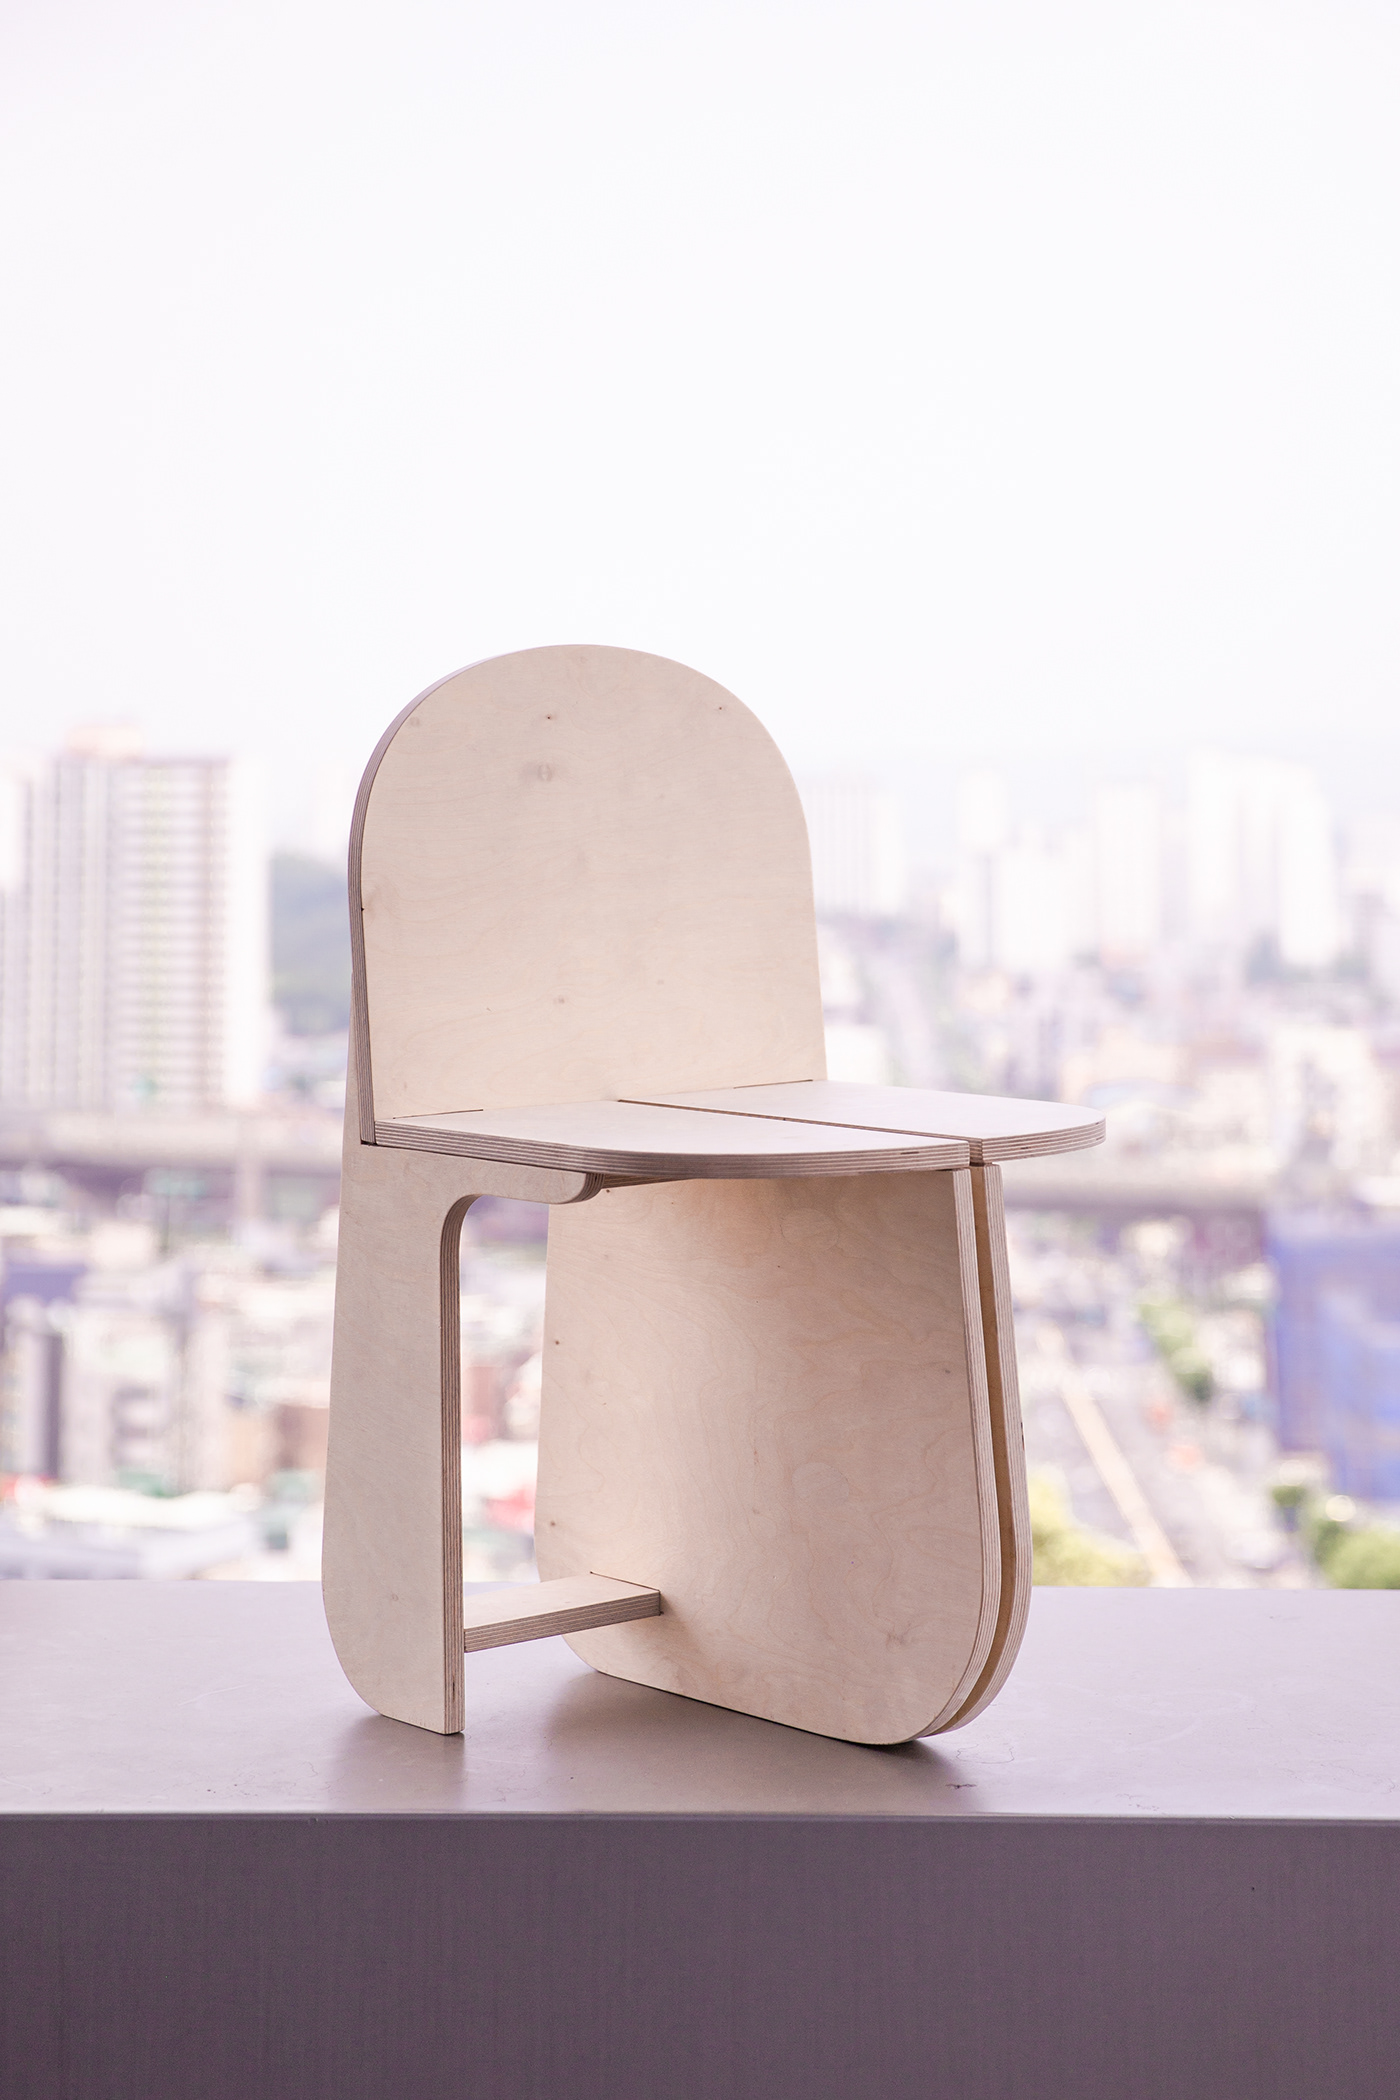 chair product furniture wood wood chair industrial design  yoonjaerry